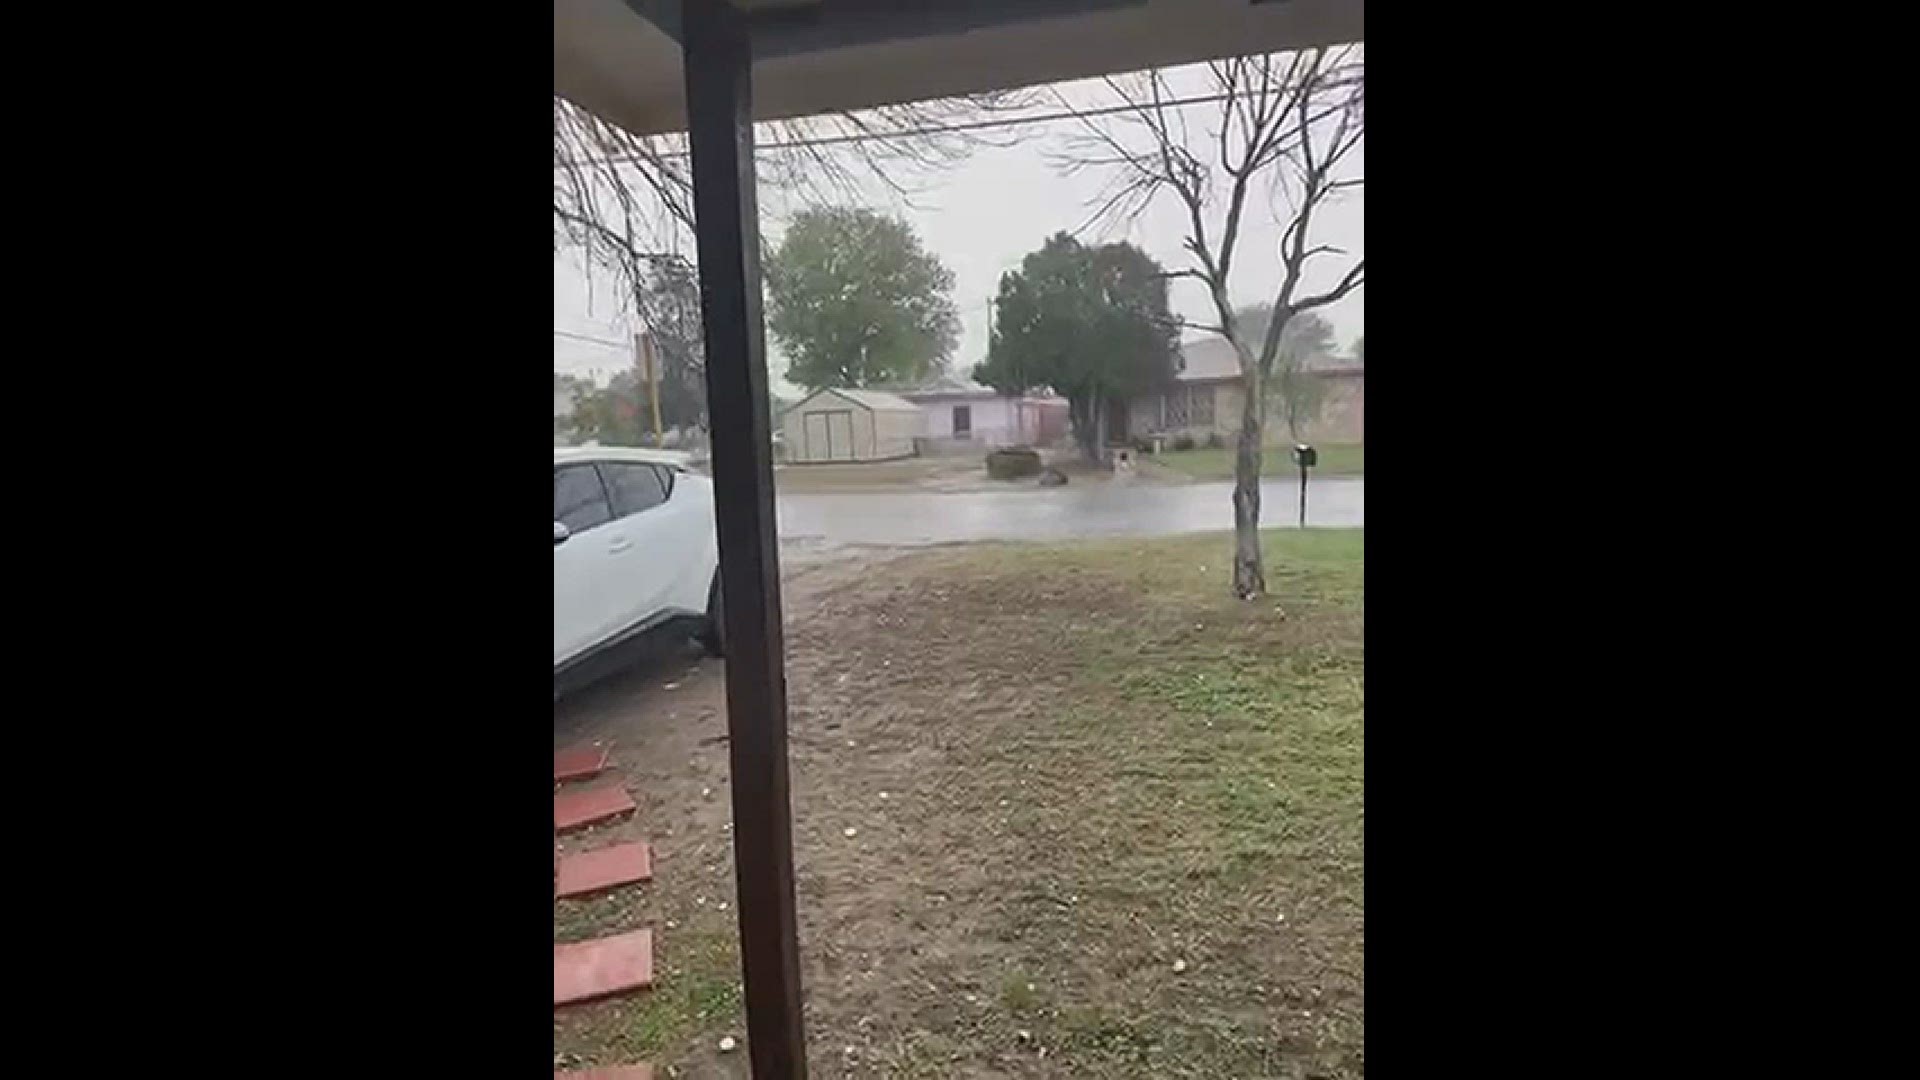 Hail rains down on Del Rio as storms push through Texas on the afternoon of April 28, 2021. (Video courtesy of Cecila Arzola.